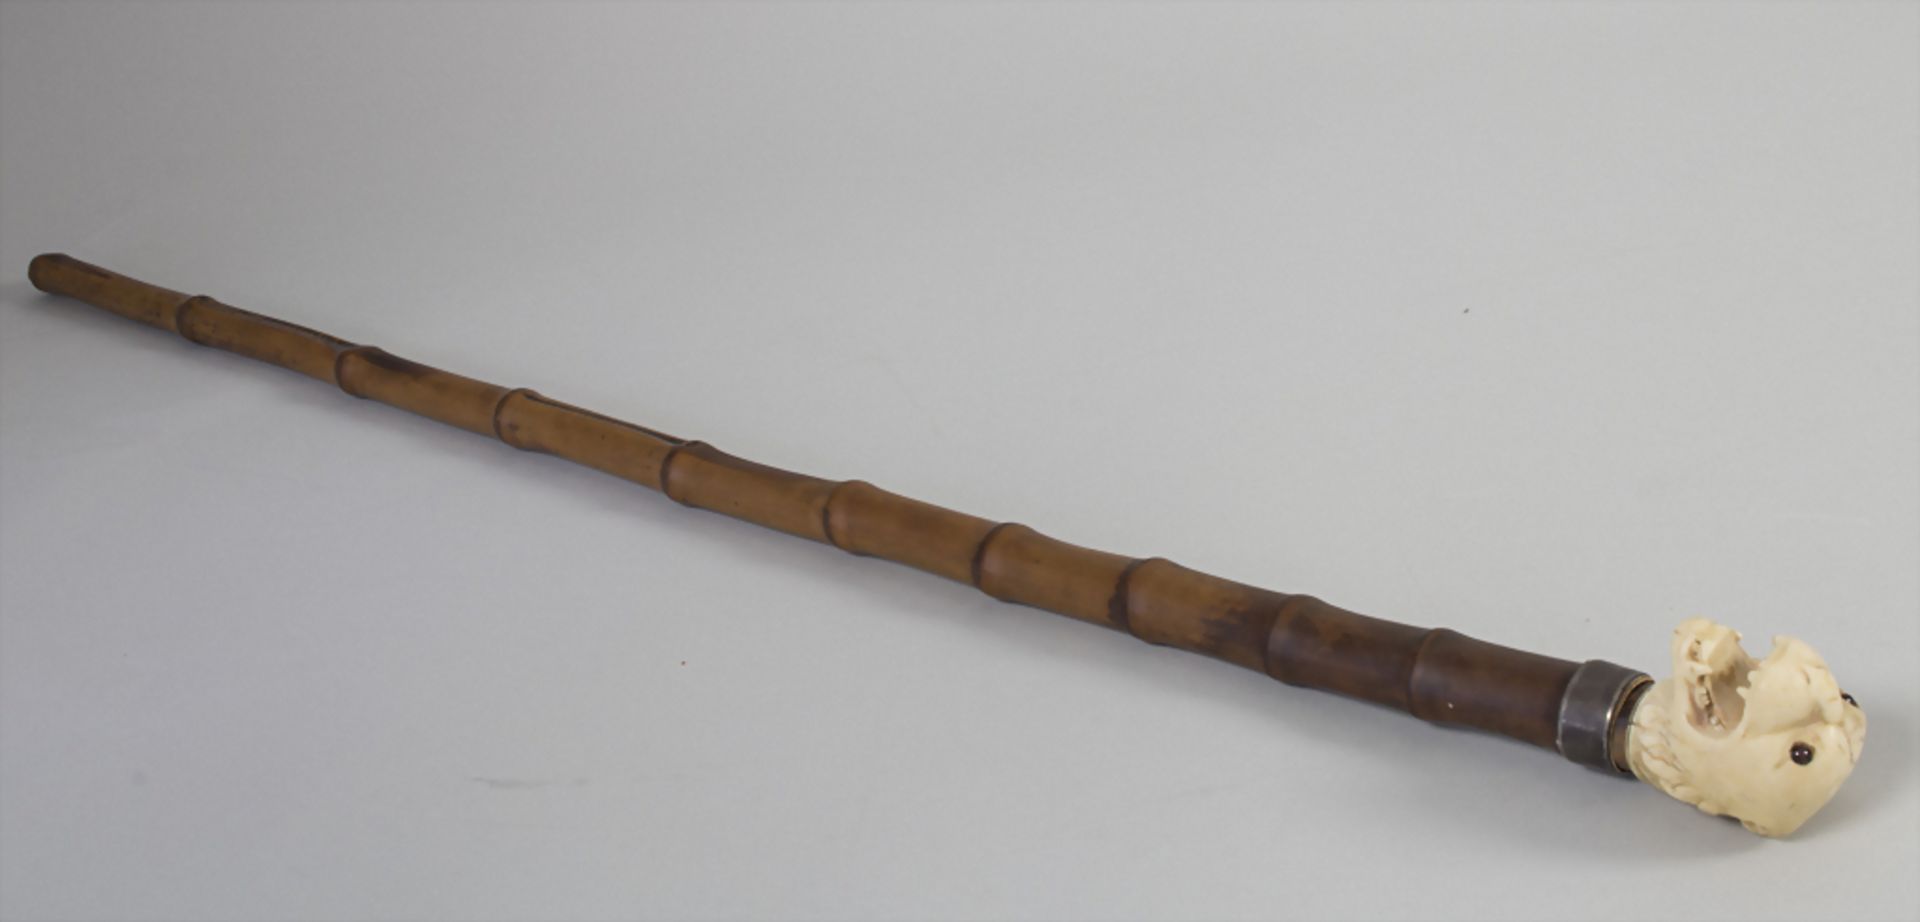 Gehstock mit Elfenbeingriff 'Panther' / A cane with ivory handle 'panther', um 1880Mat - Image 5 of 5